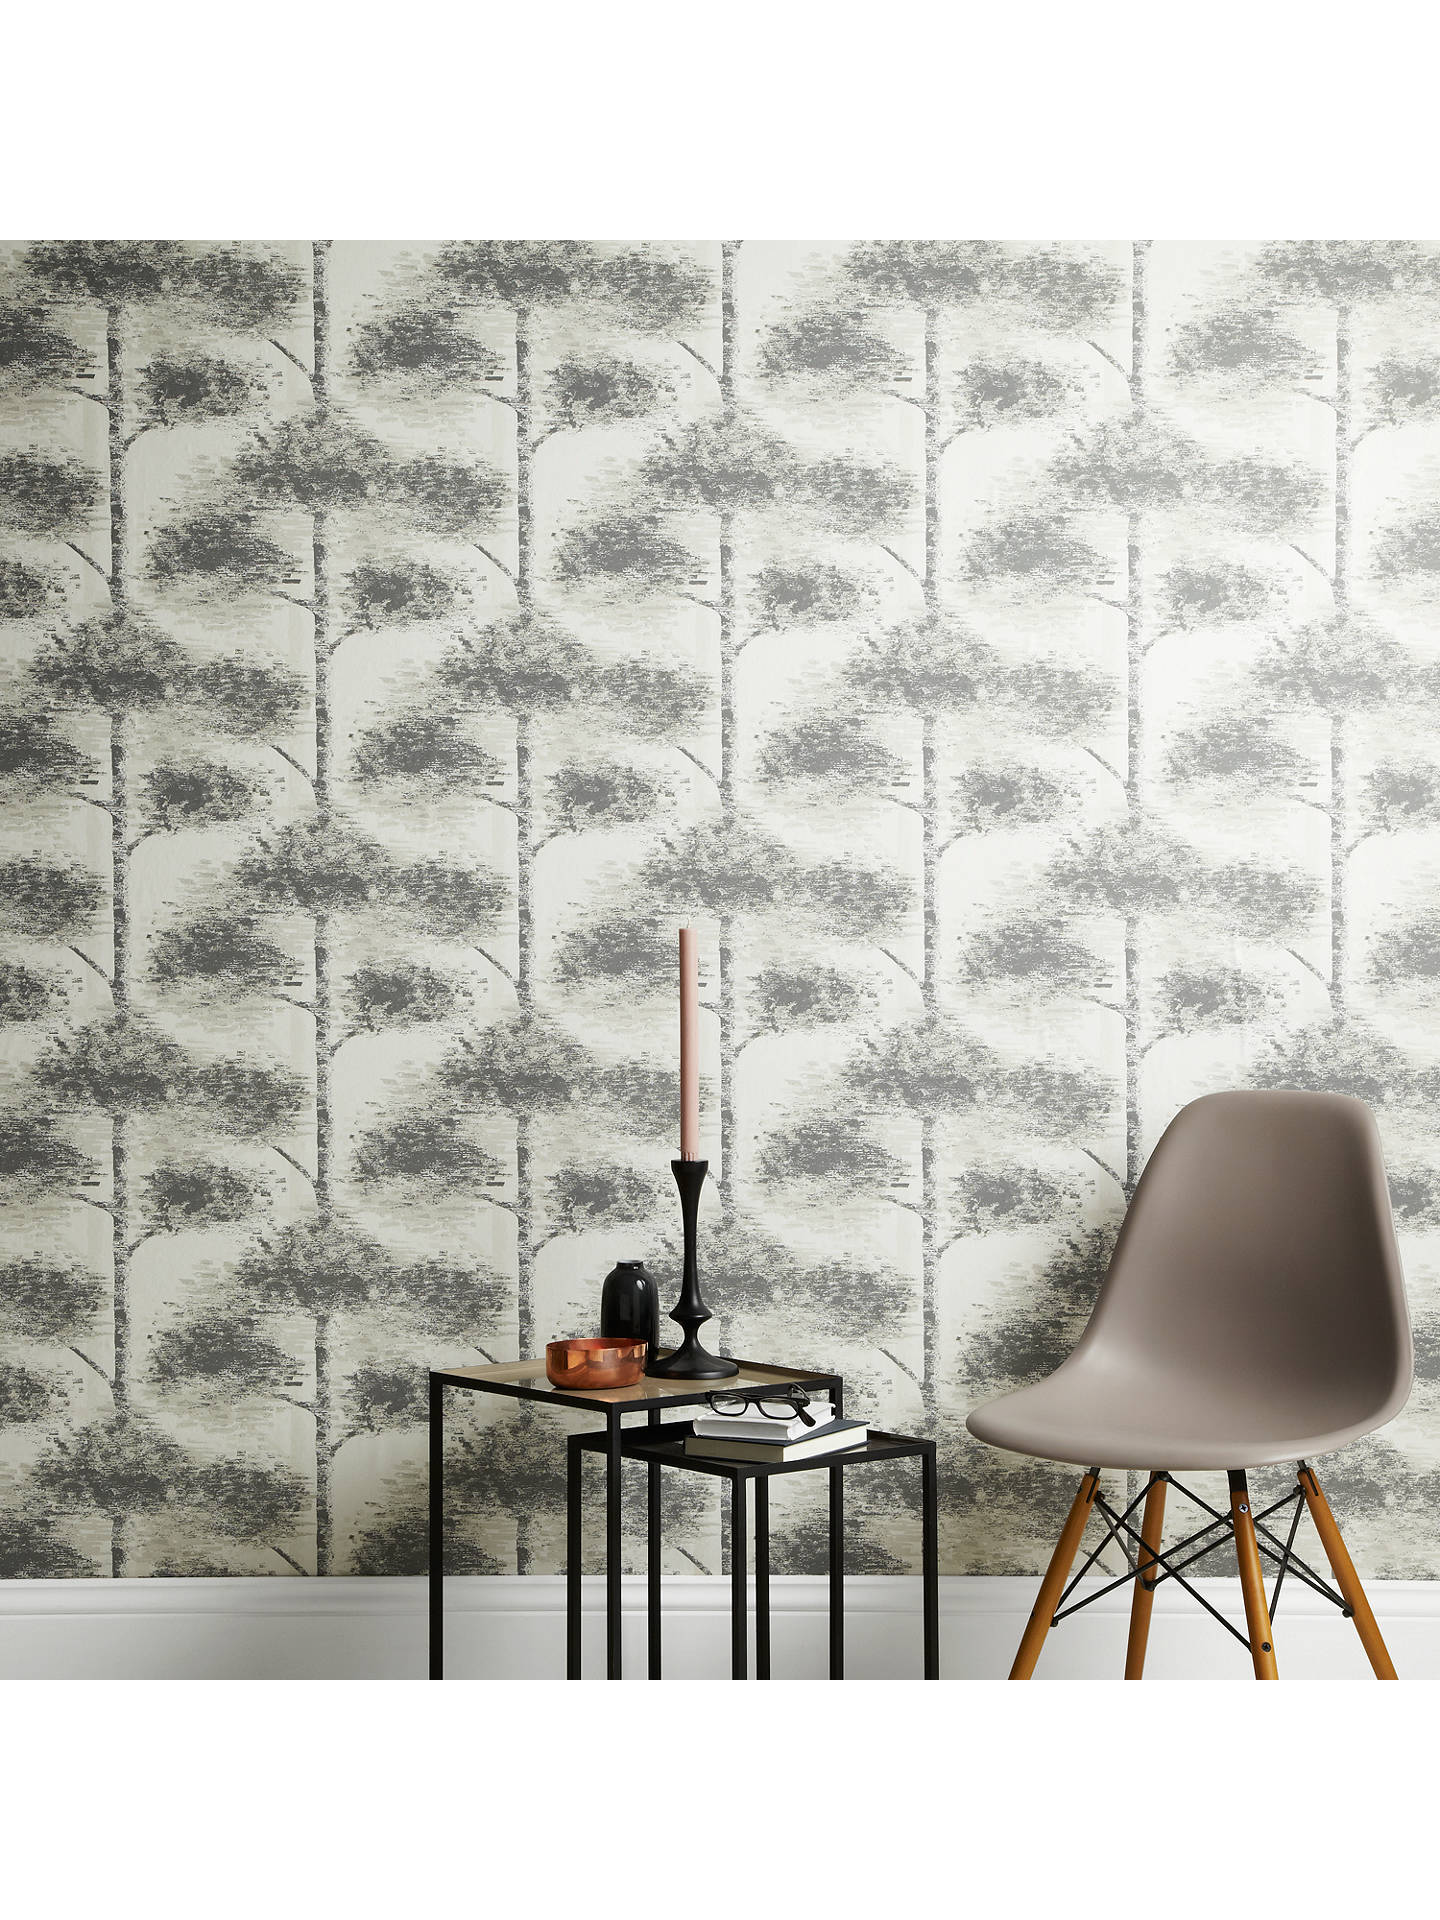 John Lewis Matching Wallpaper And Curtains - Chair , HD Wallpaper & Backgrounds